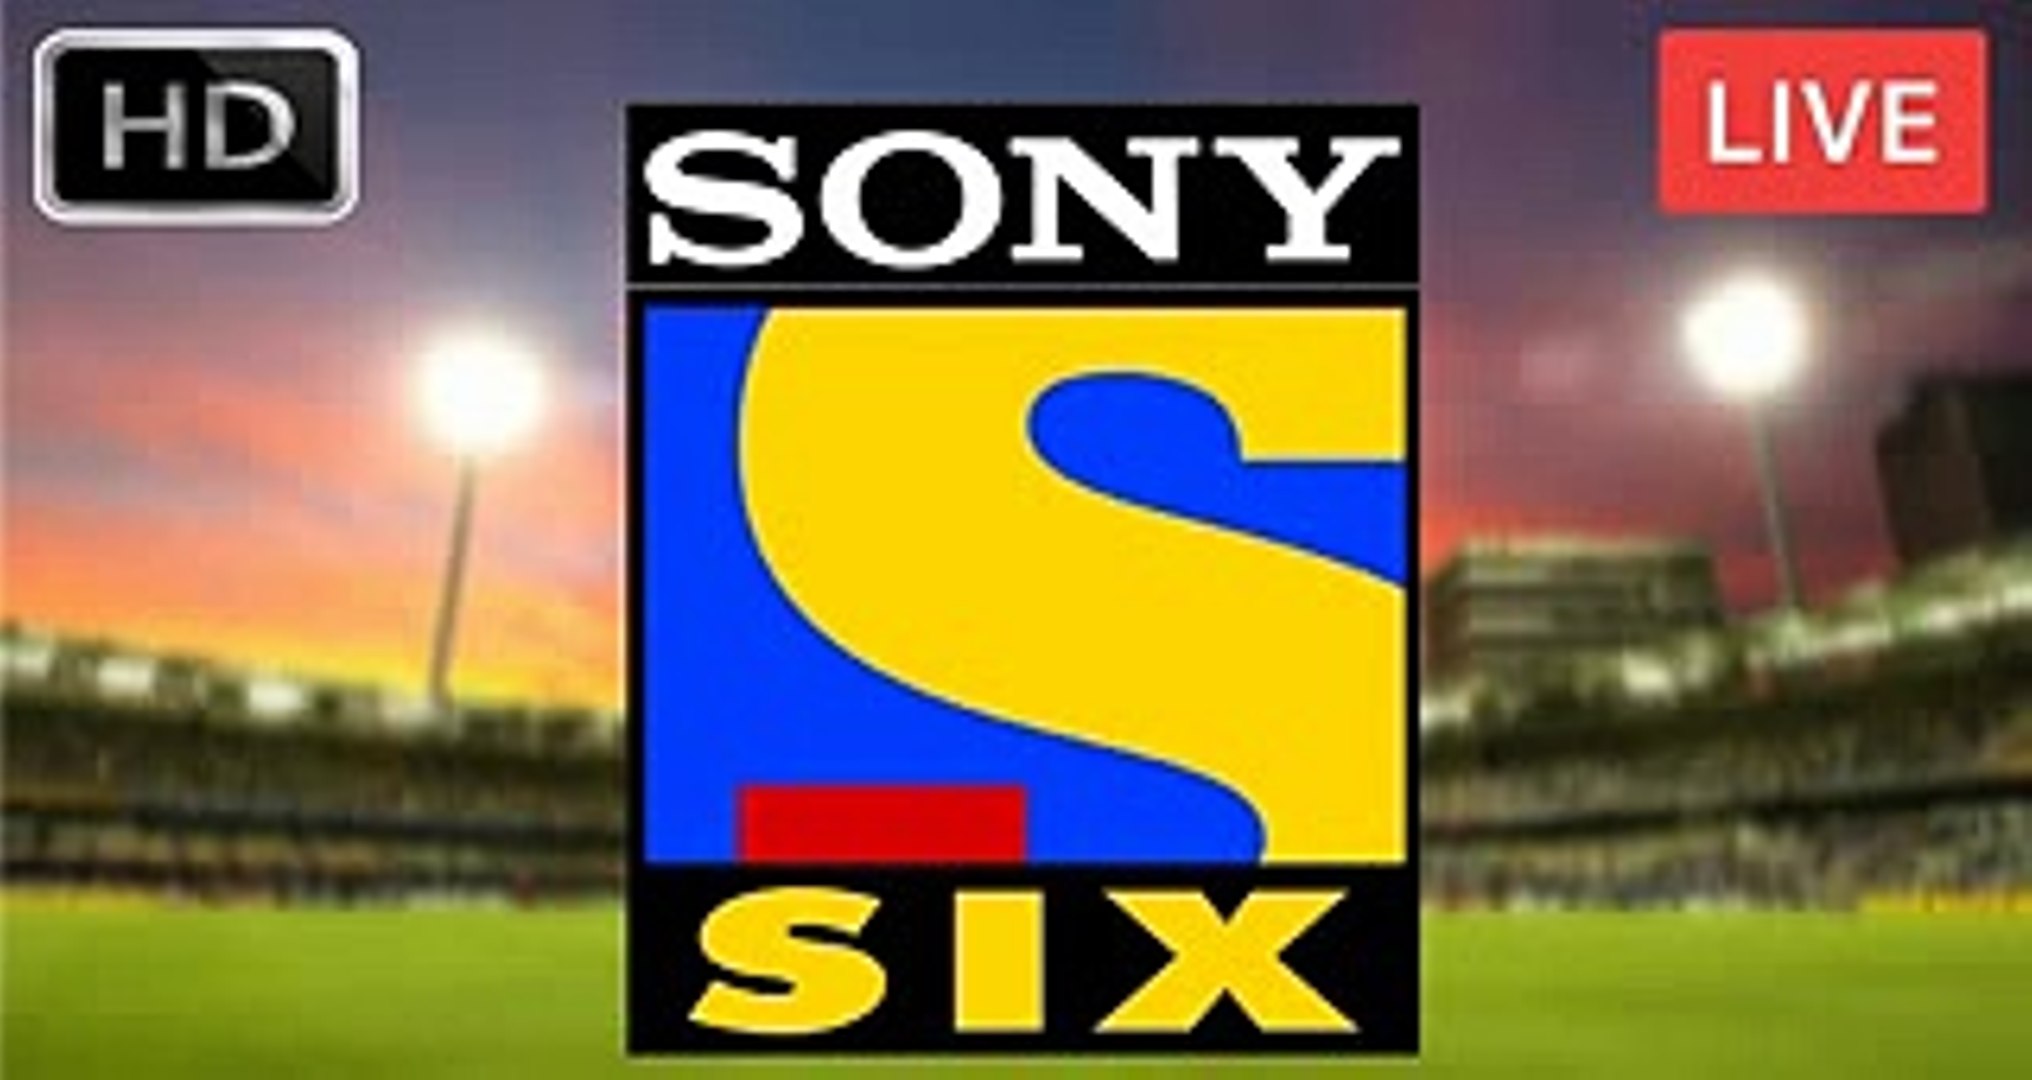 Sony Ten 3 live cricket streaming India vs Australia 2nd Test with highlights2032 x 1080